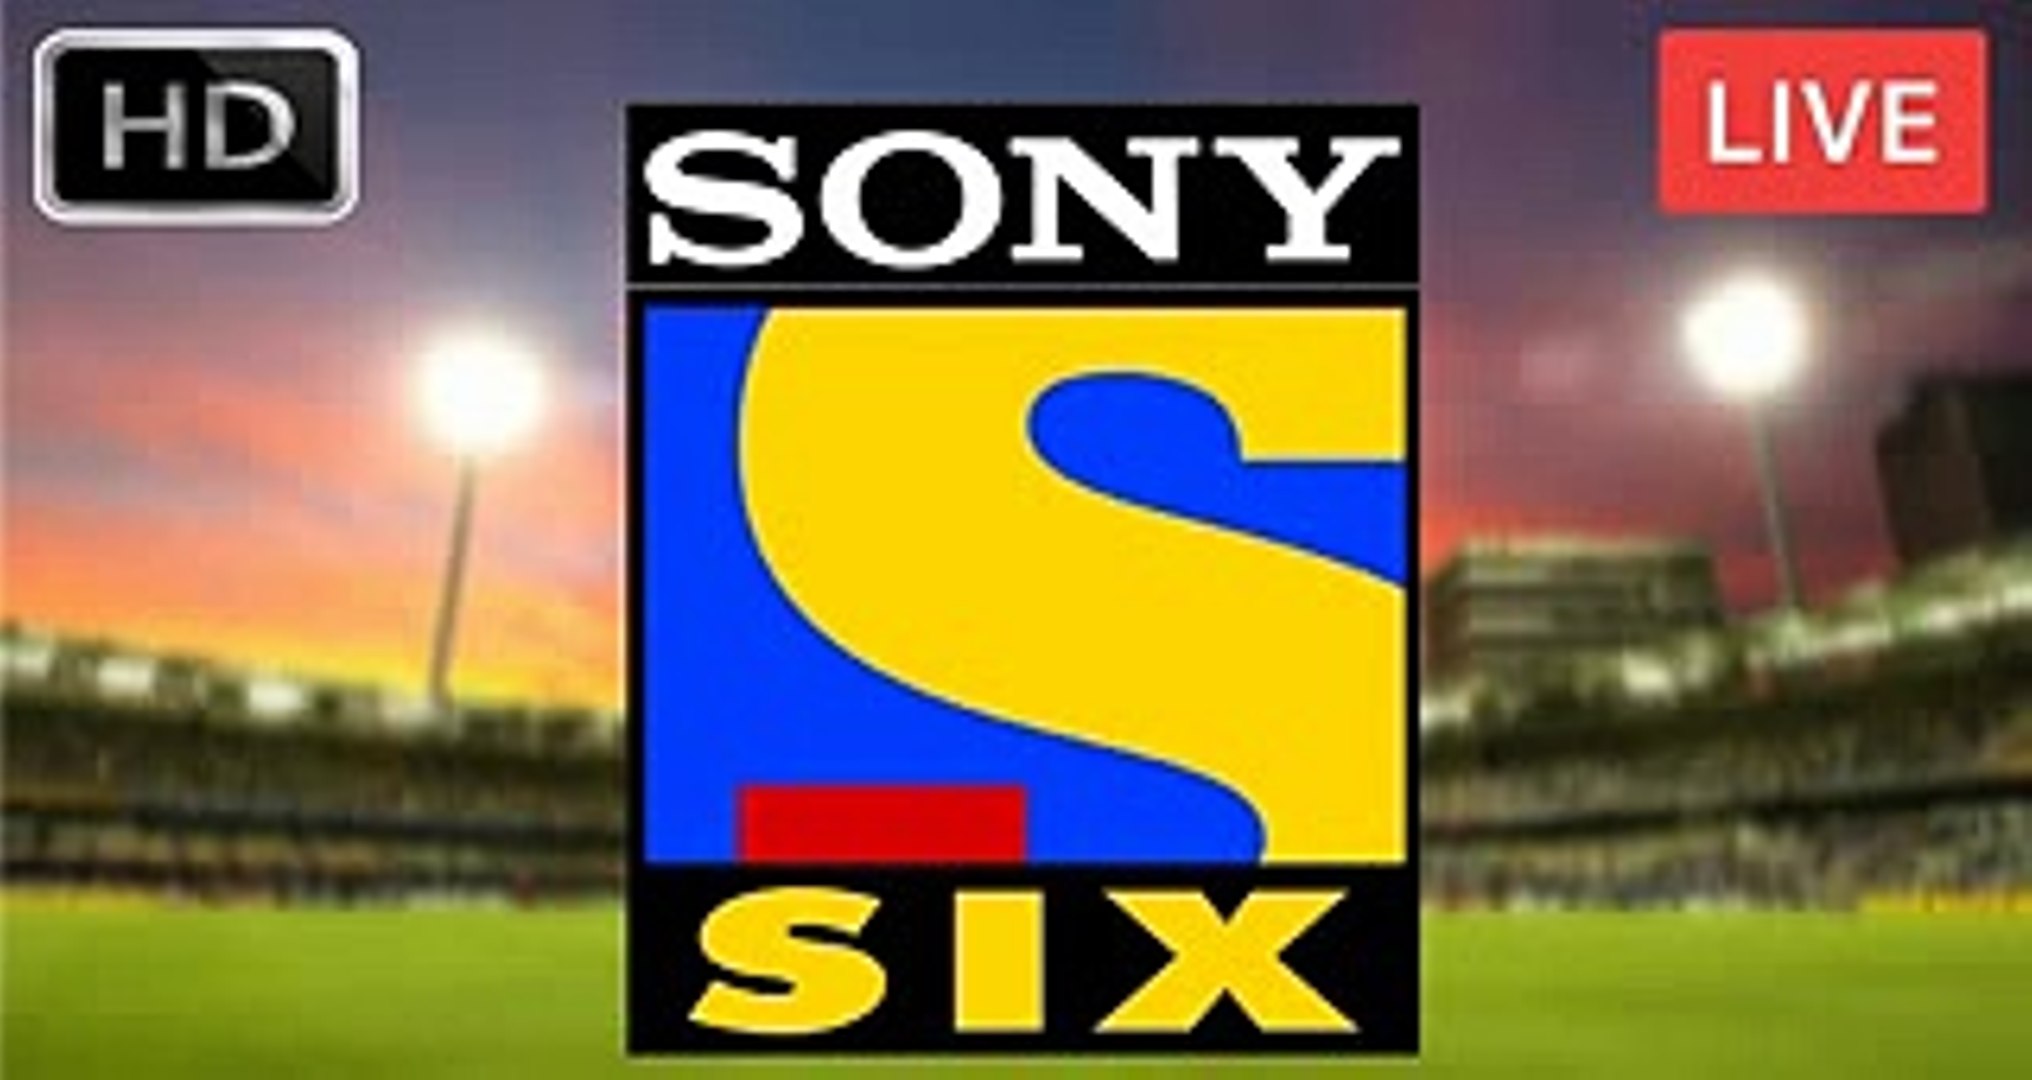 Sony Ten 3 live cricket streaming India vs Australia 2nd Test with highlights2032 x 1080